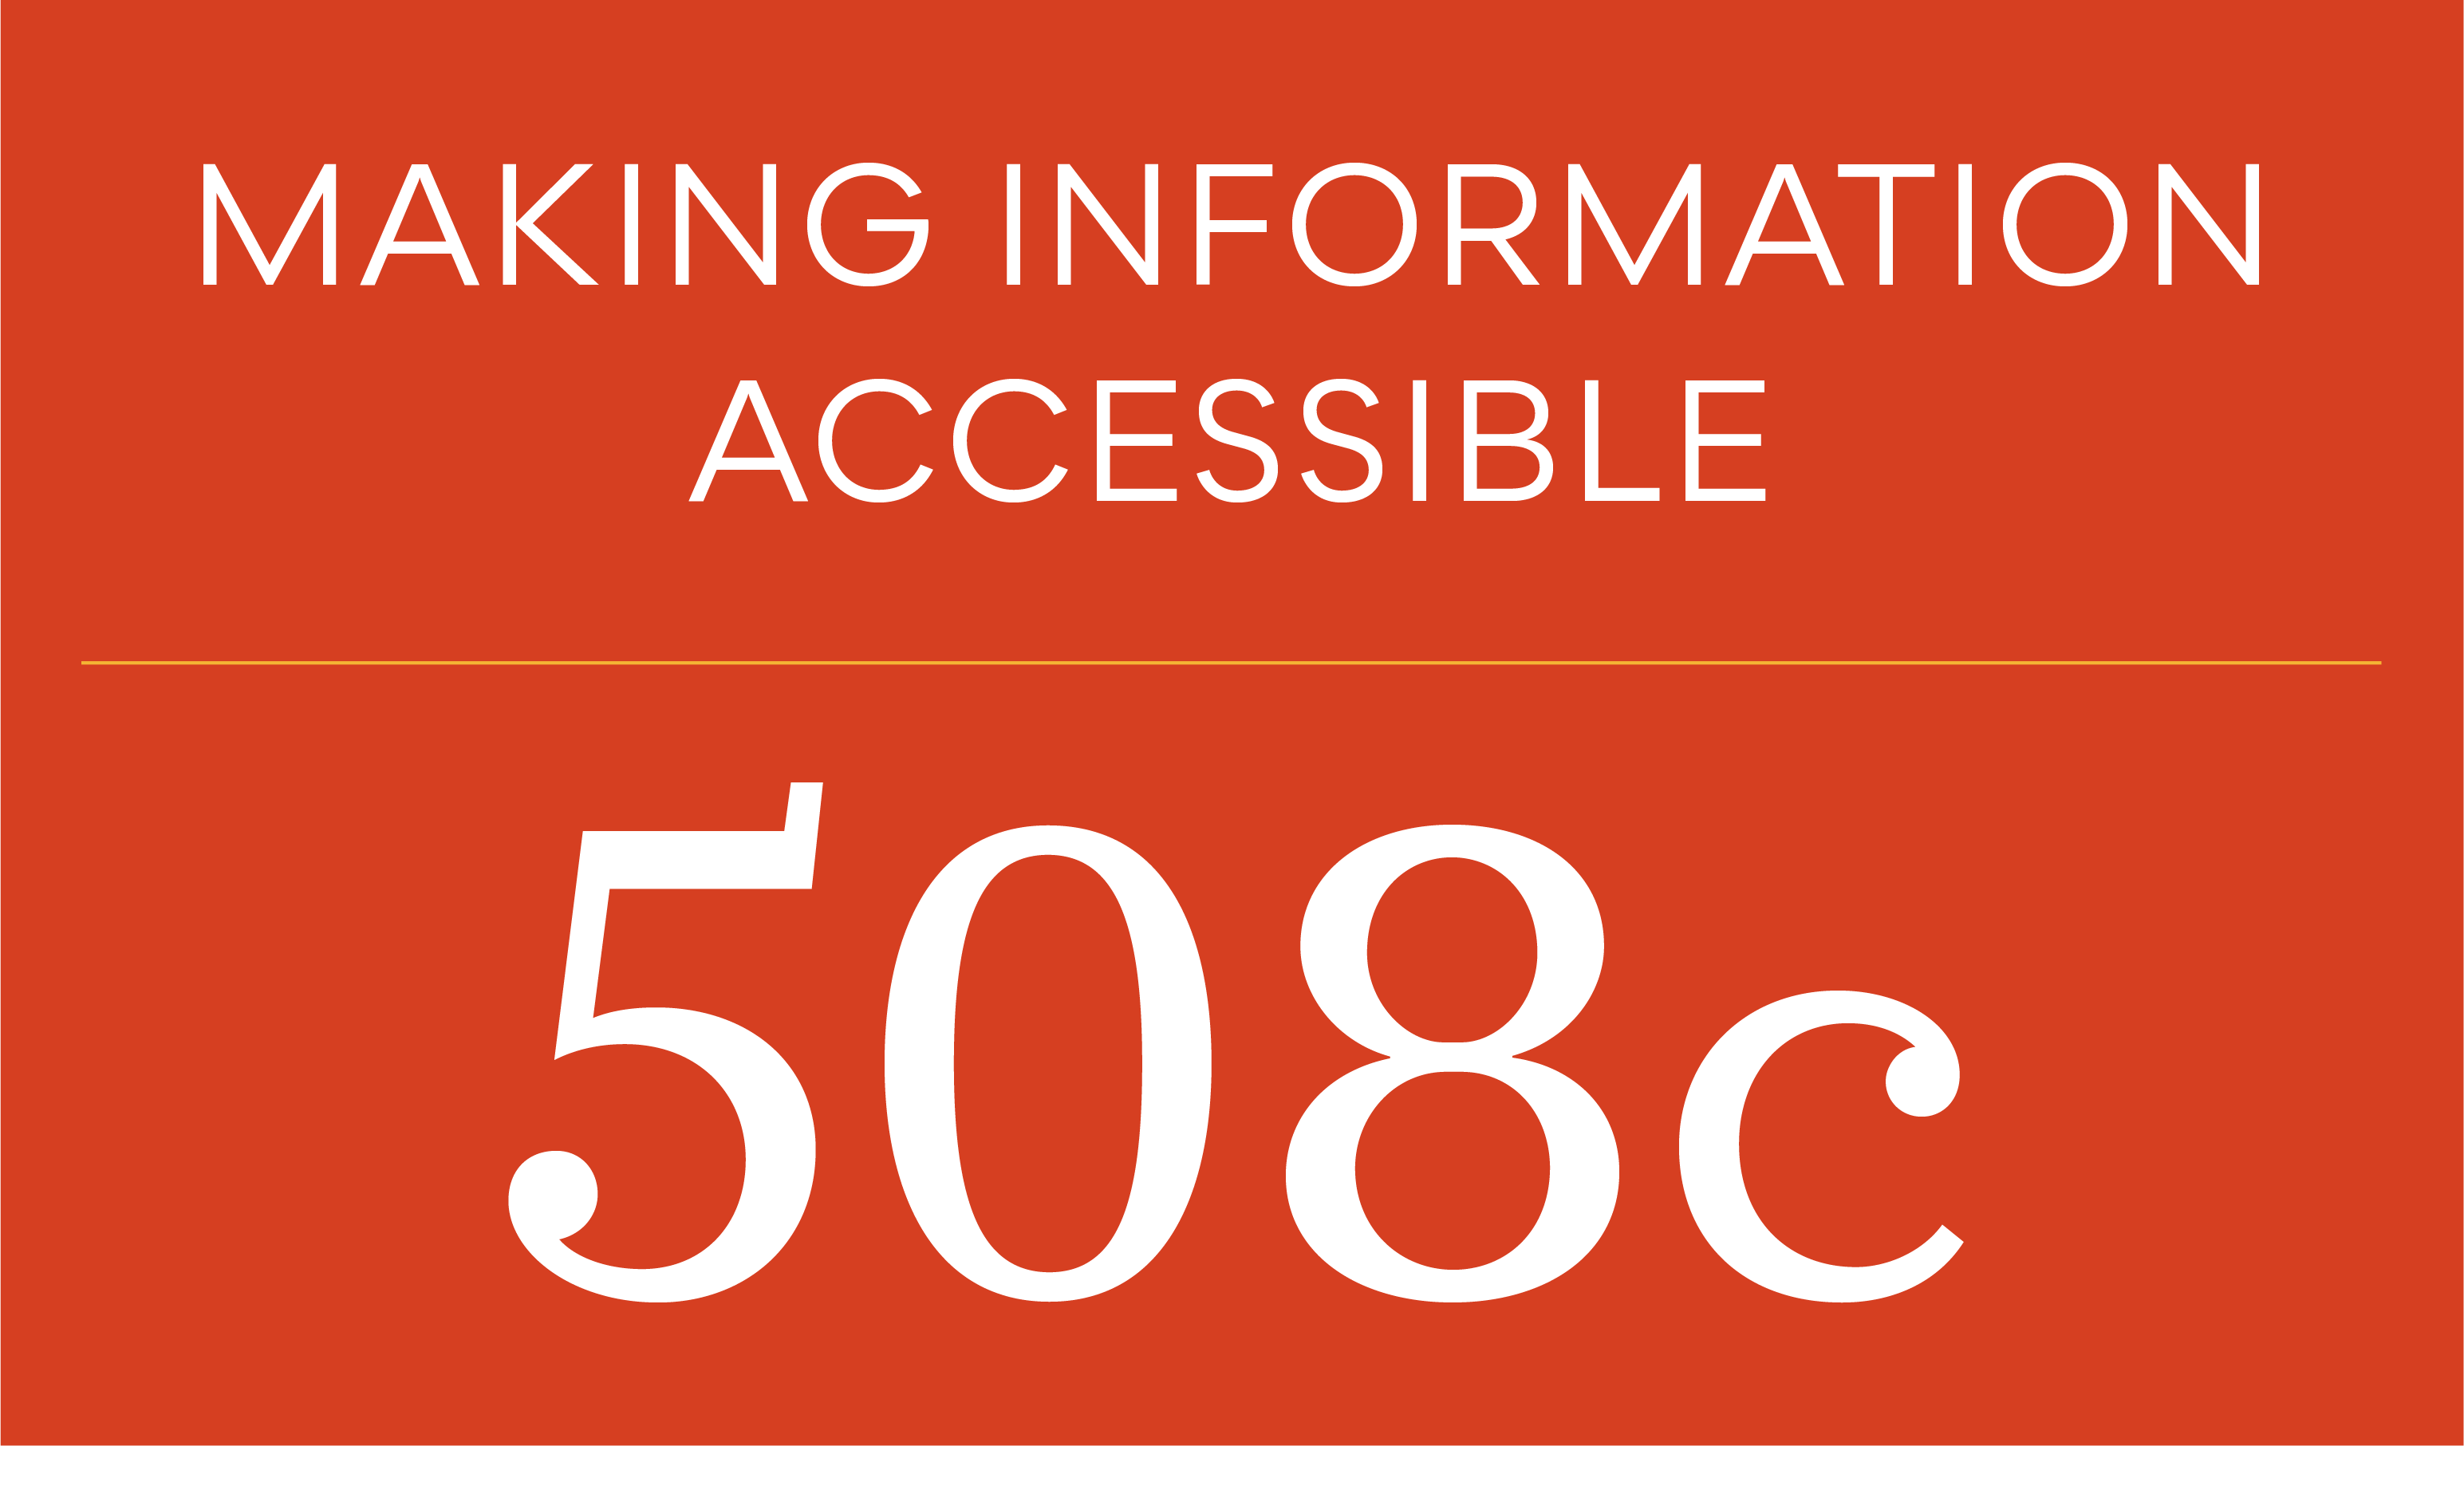 Banner that says 508c: Making Information Accessible